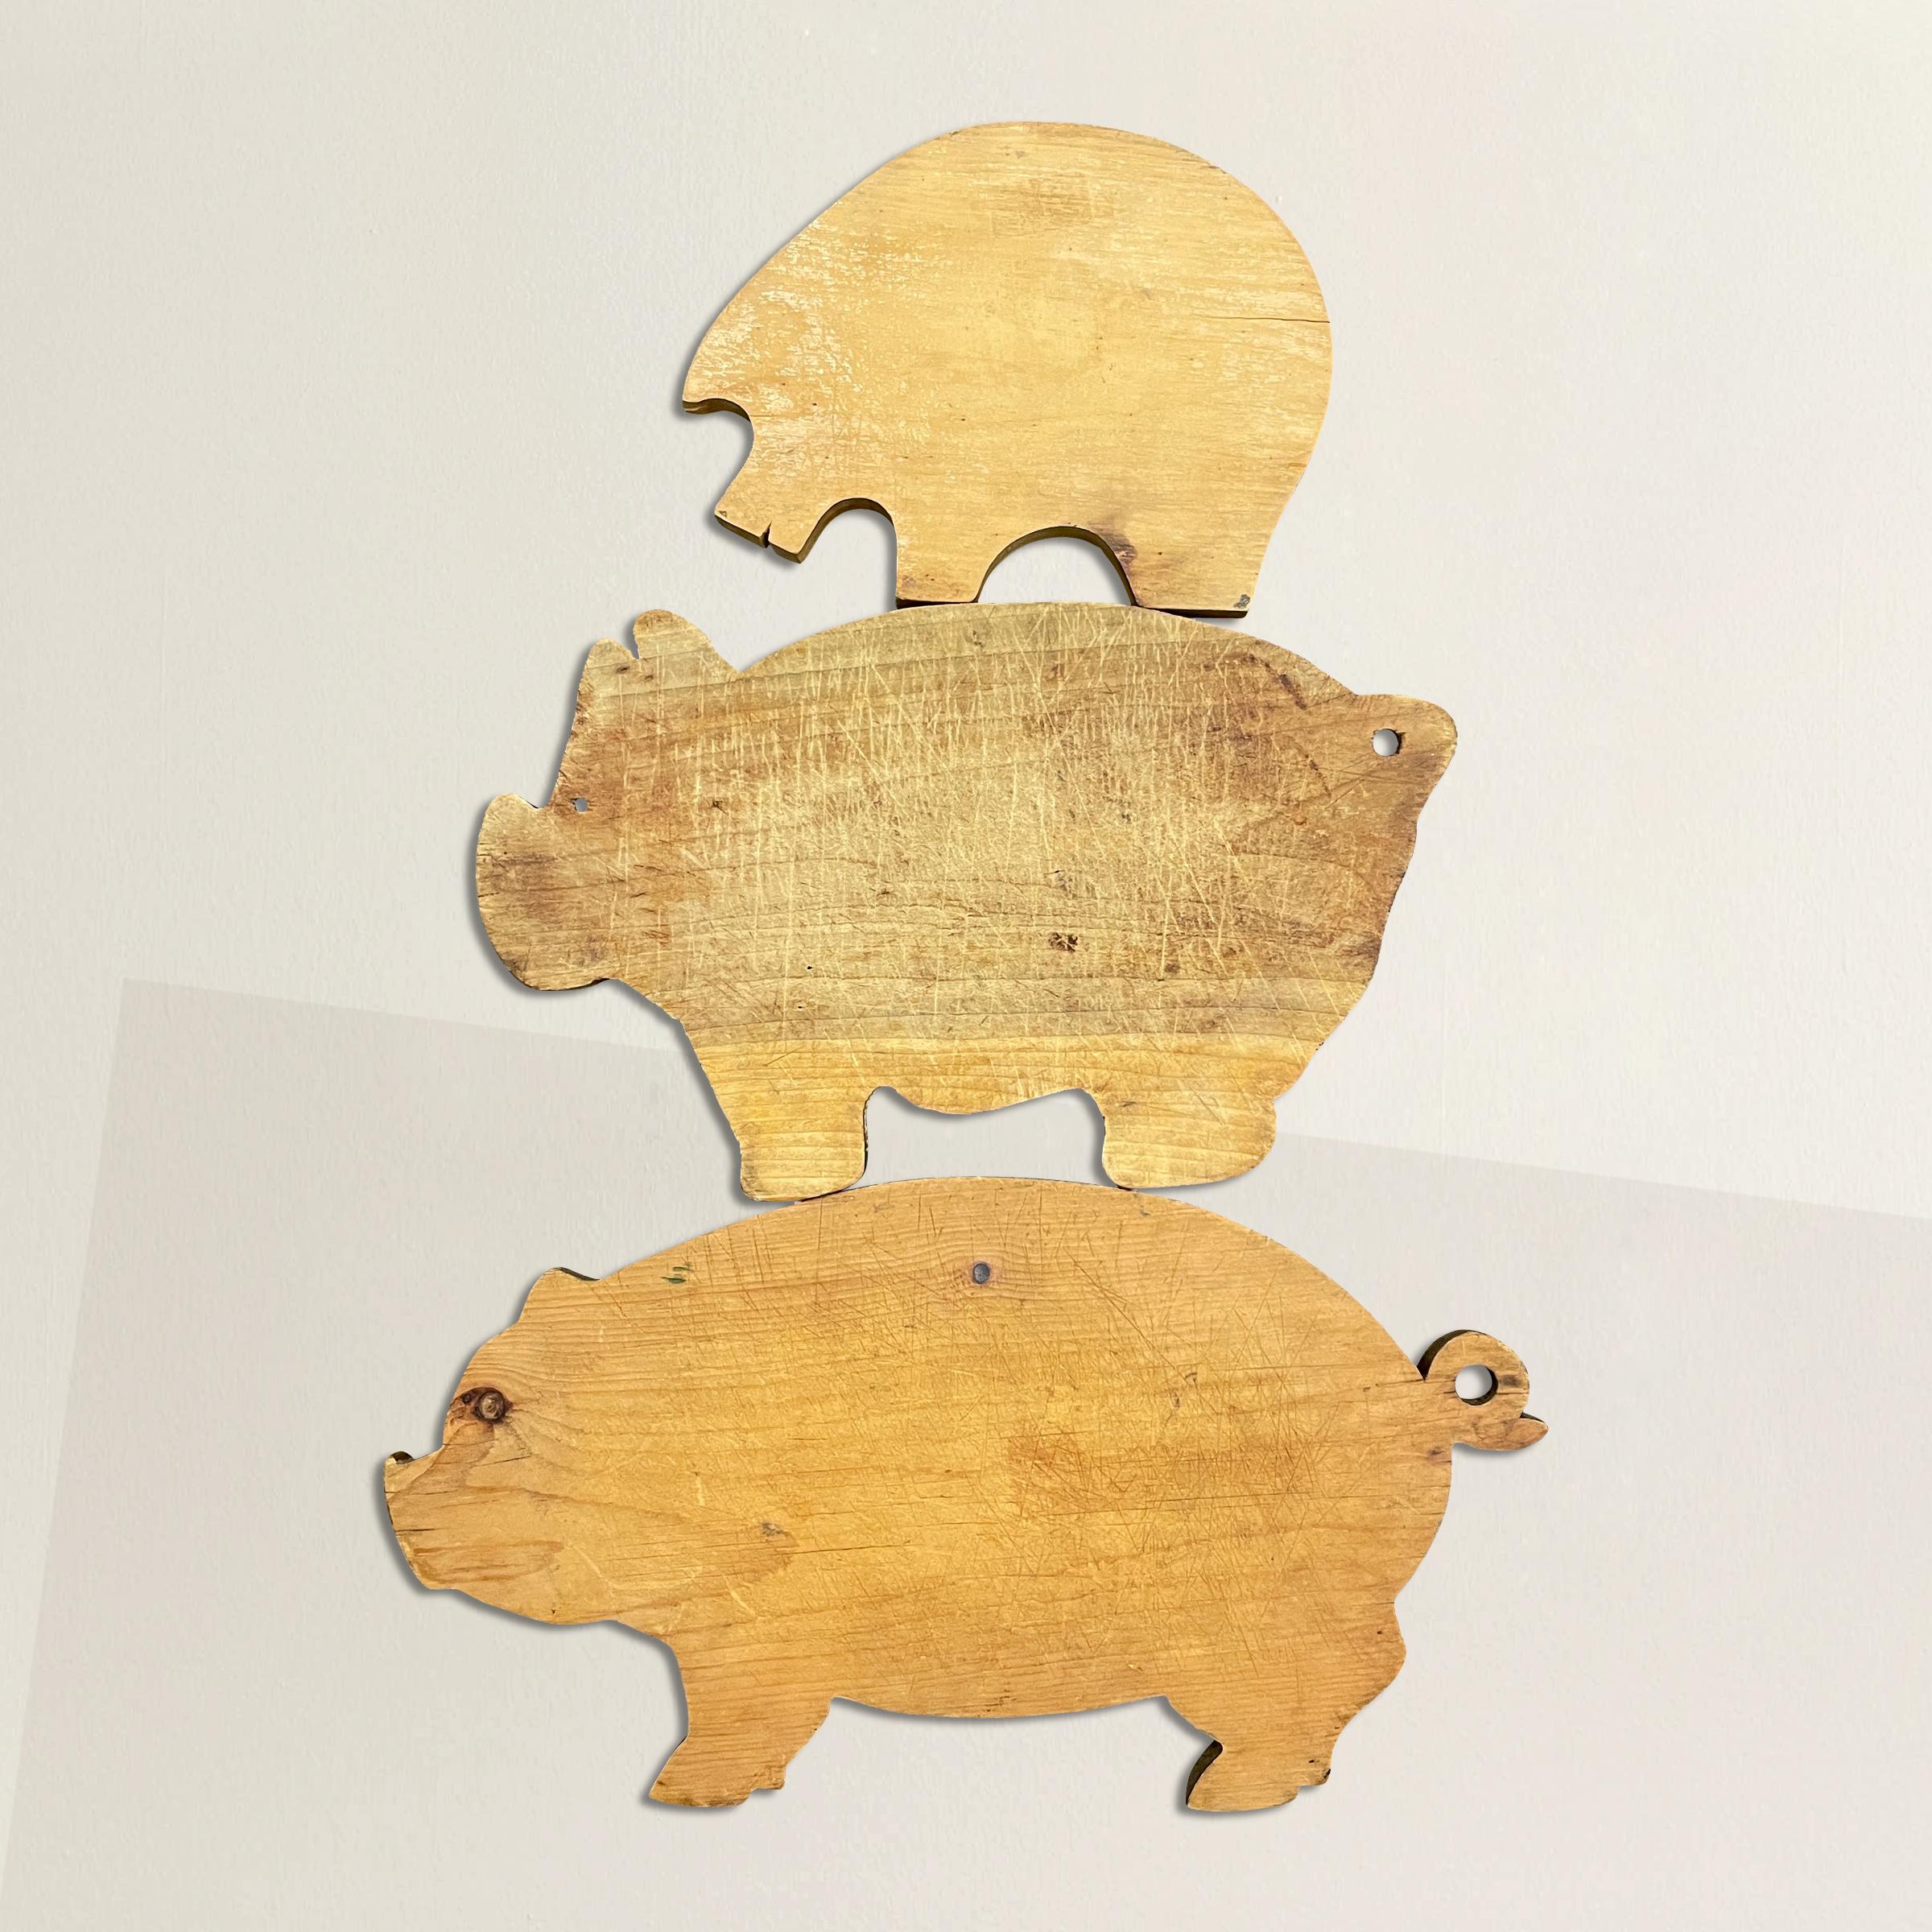 A charming set of three vintage American bucolic pine and maple pig cutting boards, each with their own personality, and including custom wall mounts so you can hang them in your kitchen, pantry, or anywhere else you desire. 

Measures: Small: